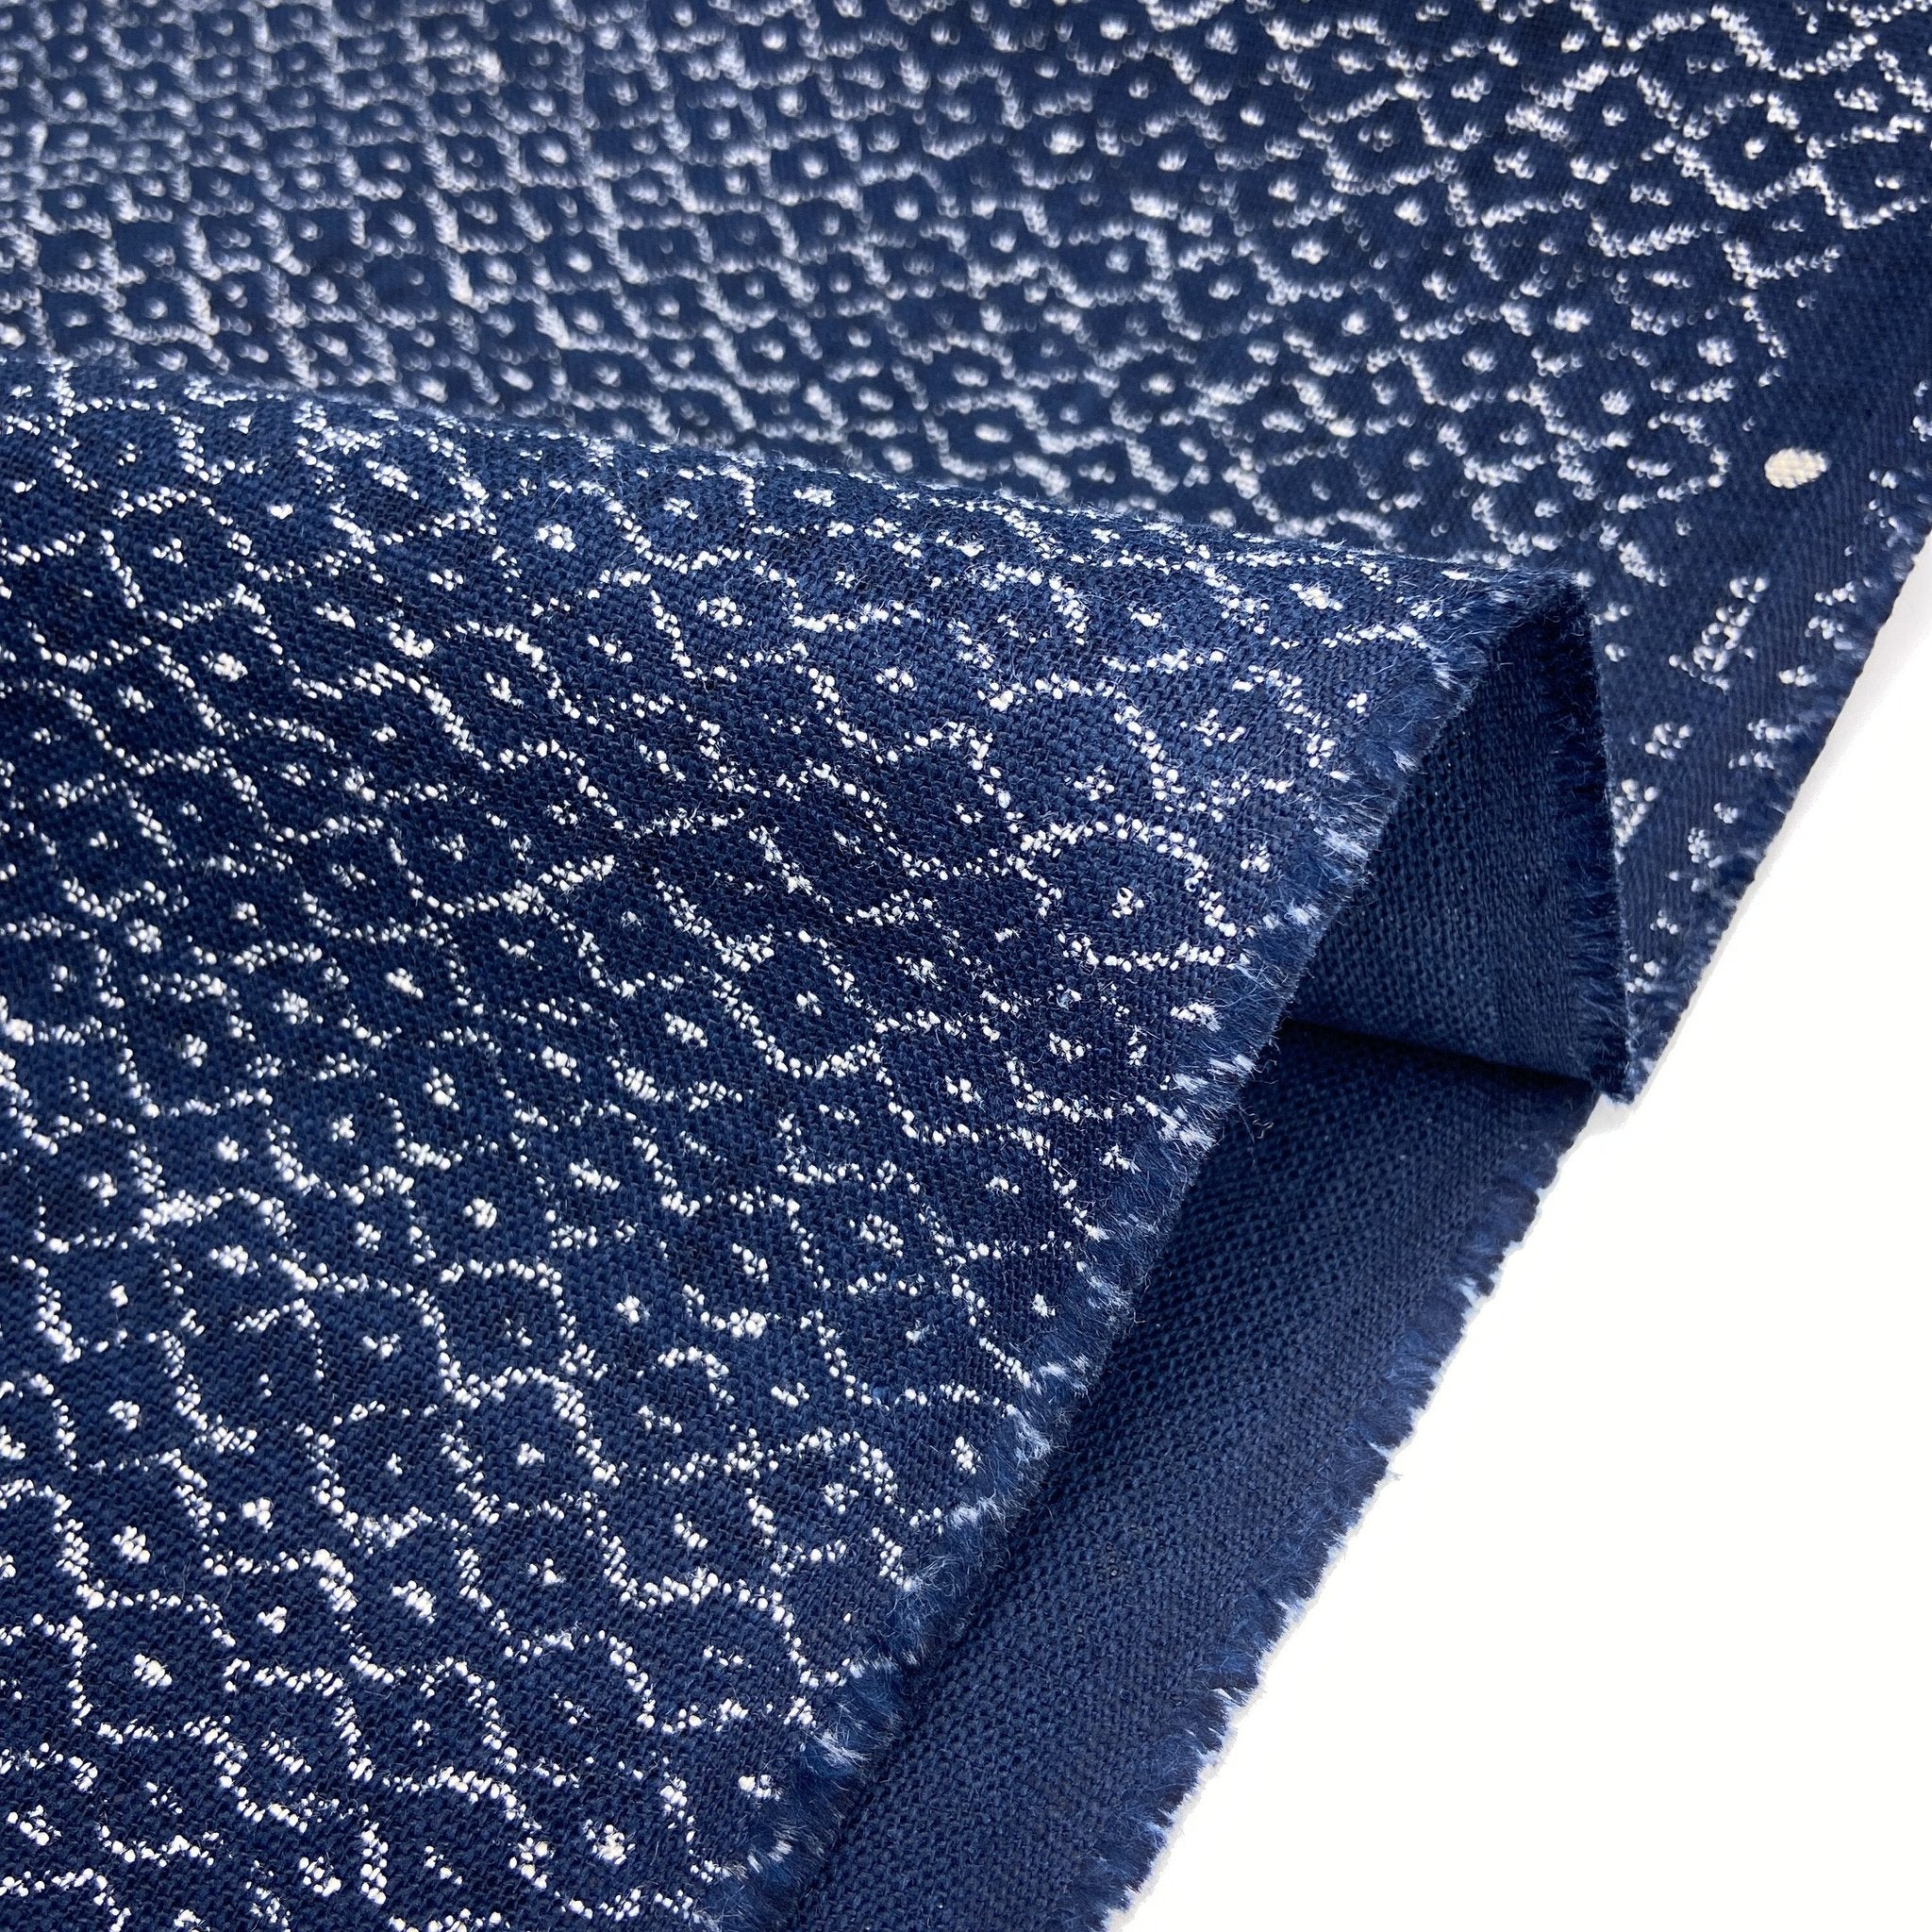 Japanese Cotton Uneven Yarns Sheeting Print - Indigo Staggered Wave